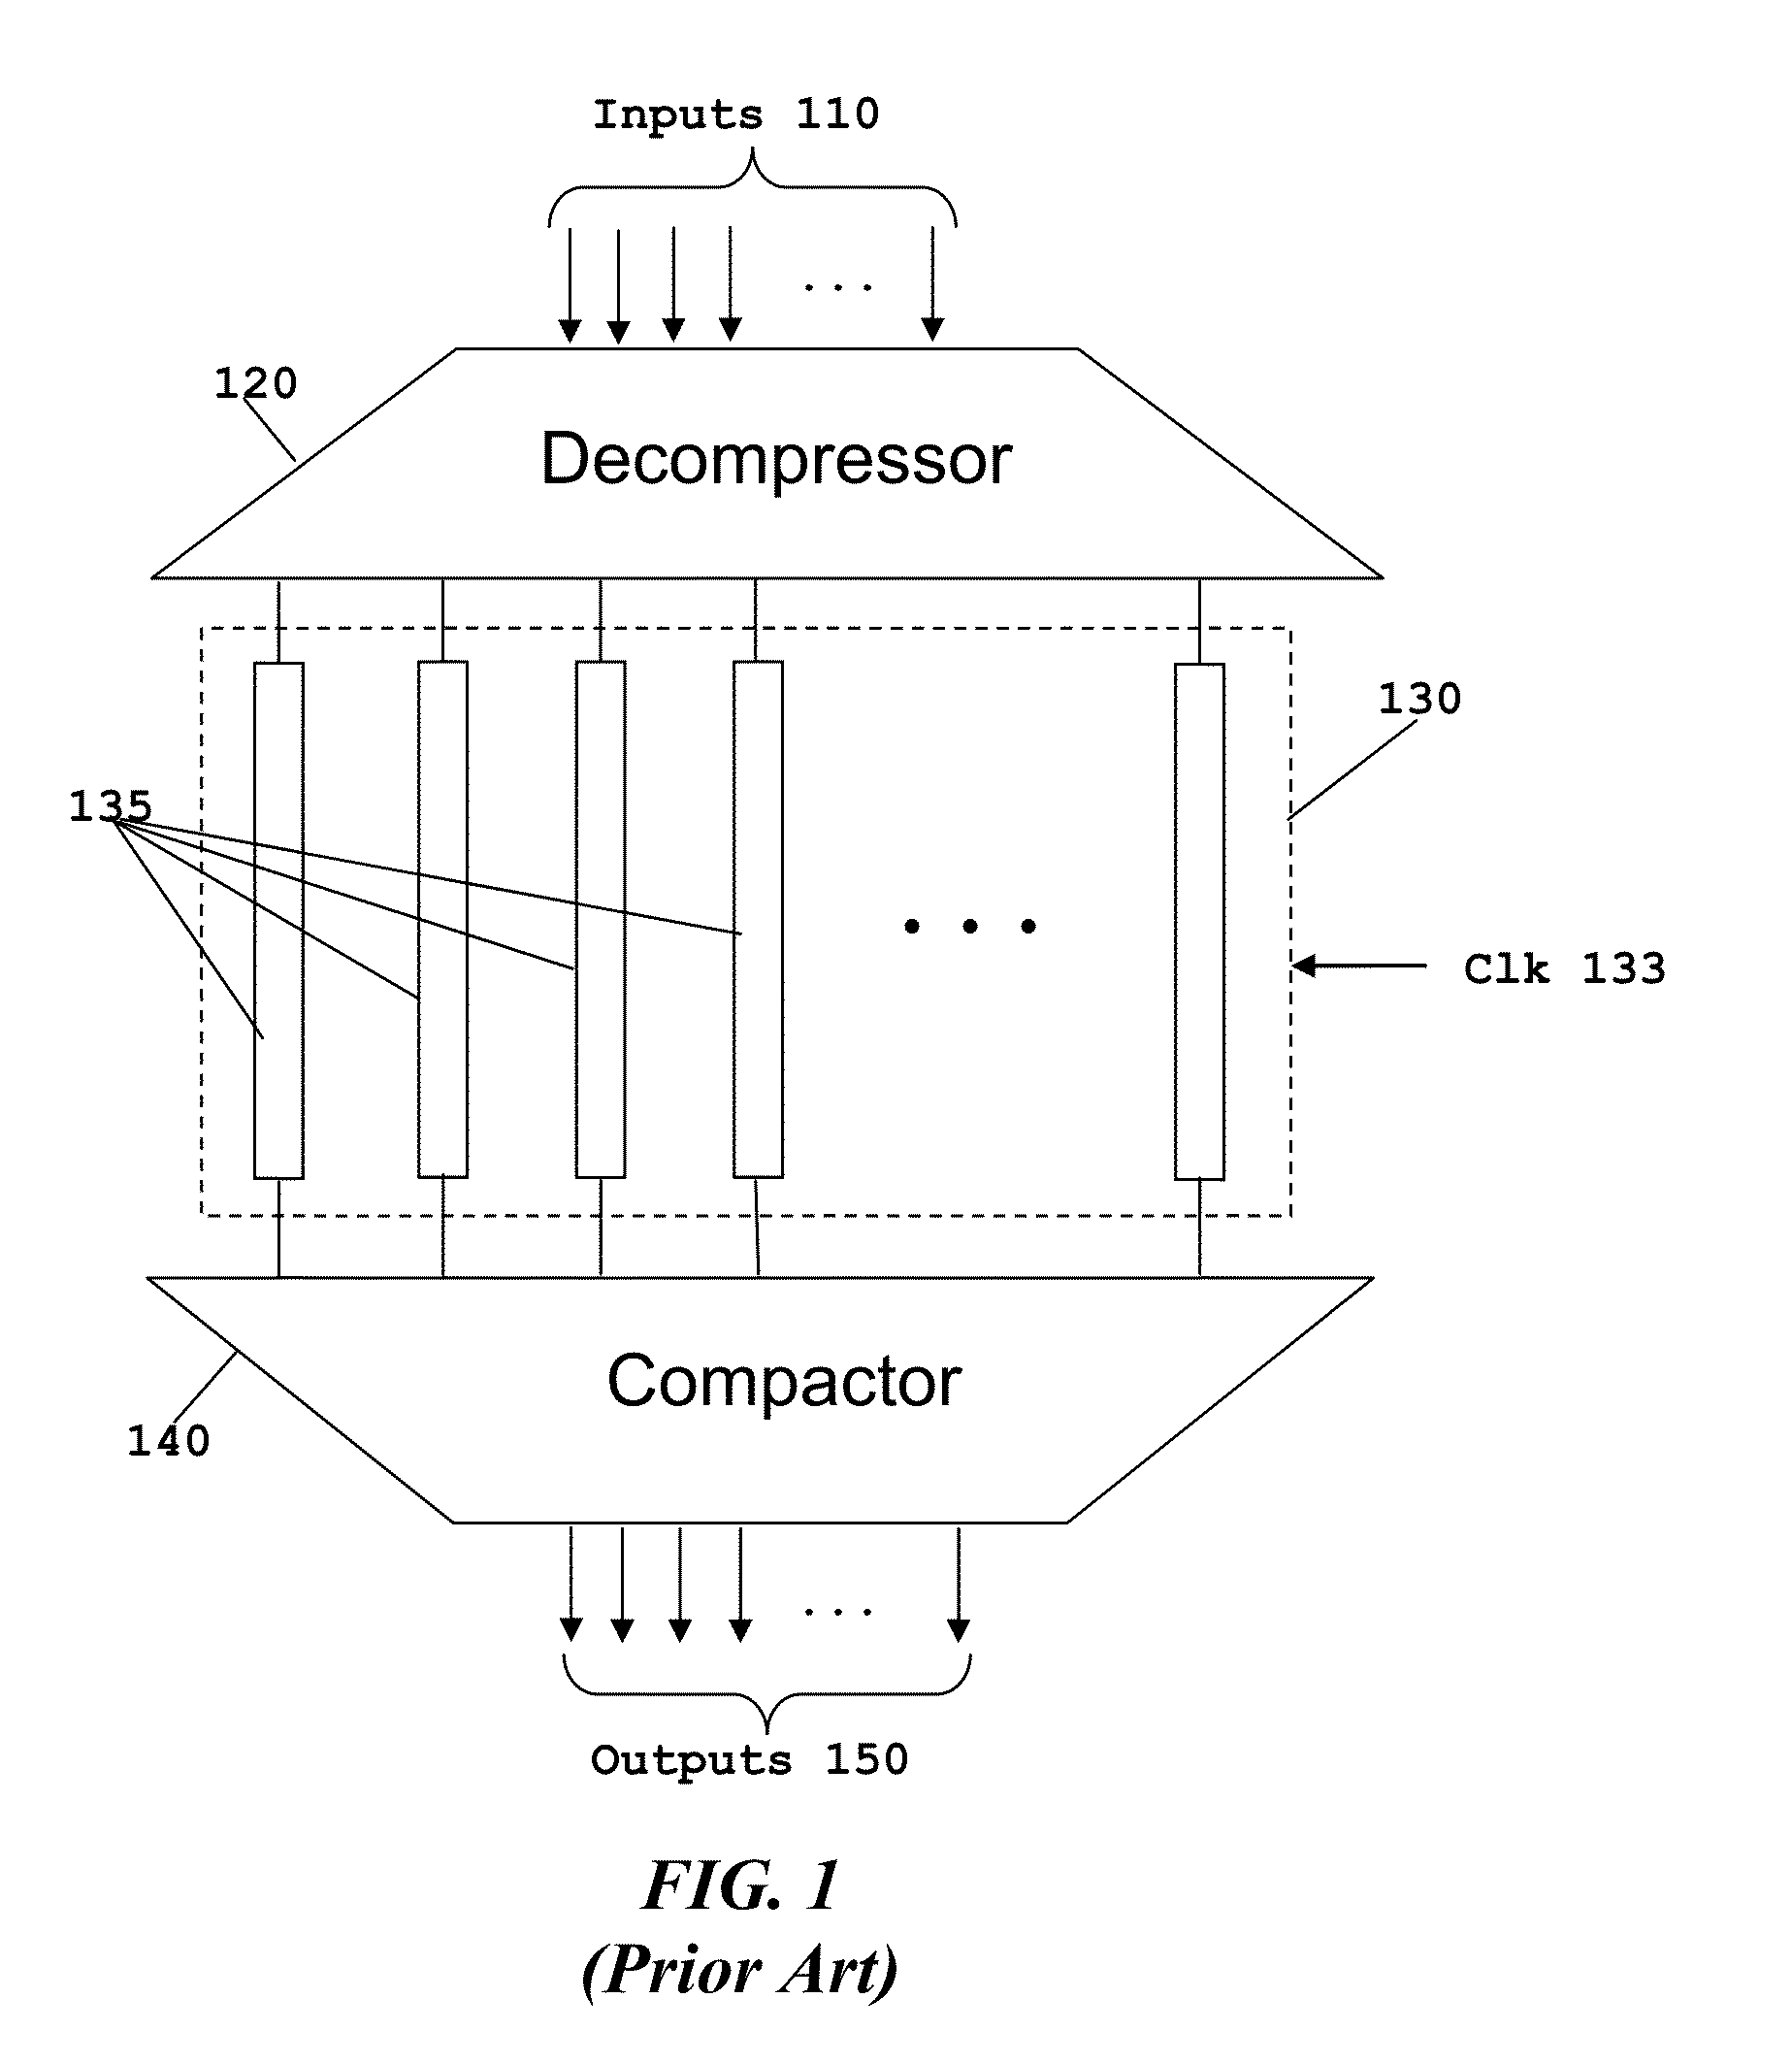 Scan Compression Architecture with Bypassable Scan Chains for Low Test Mode Power